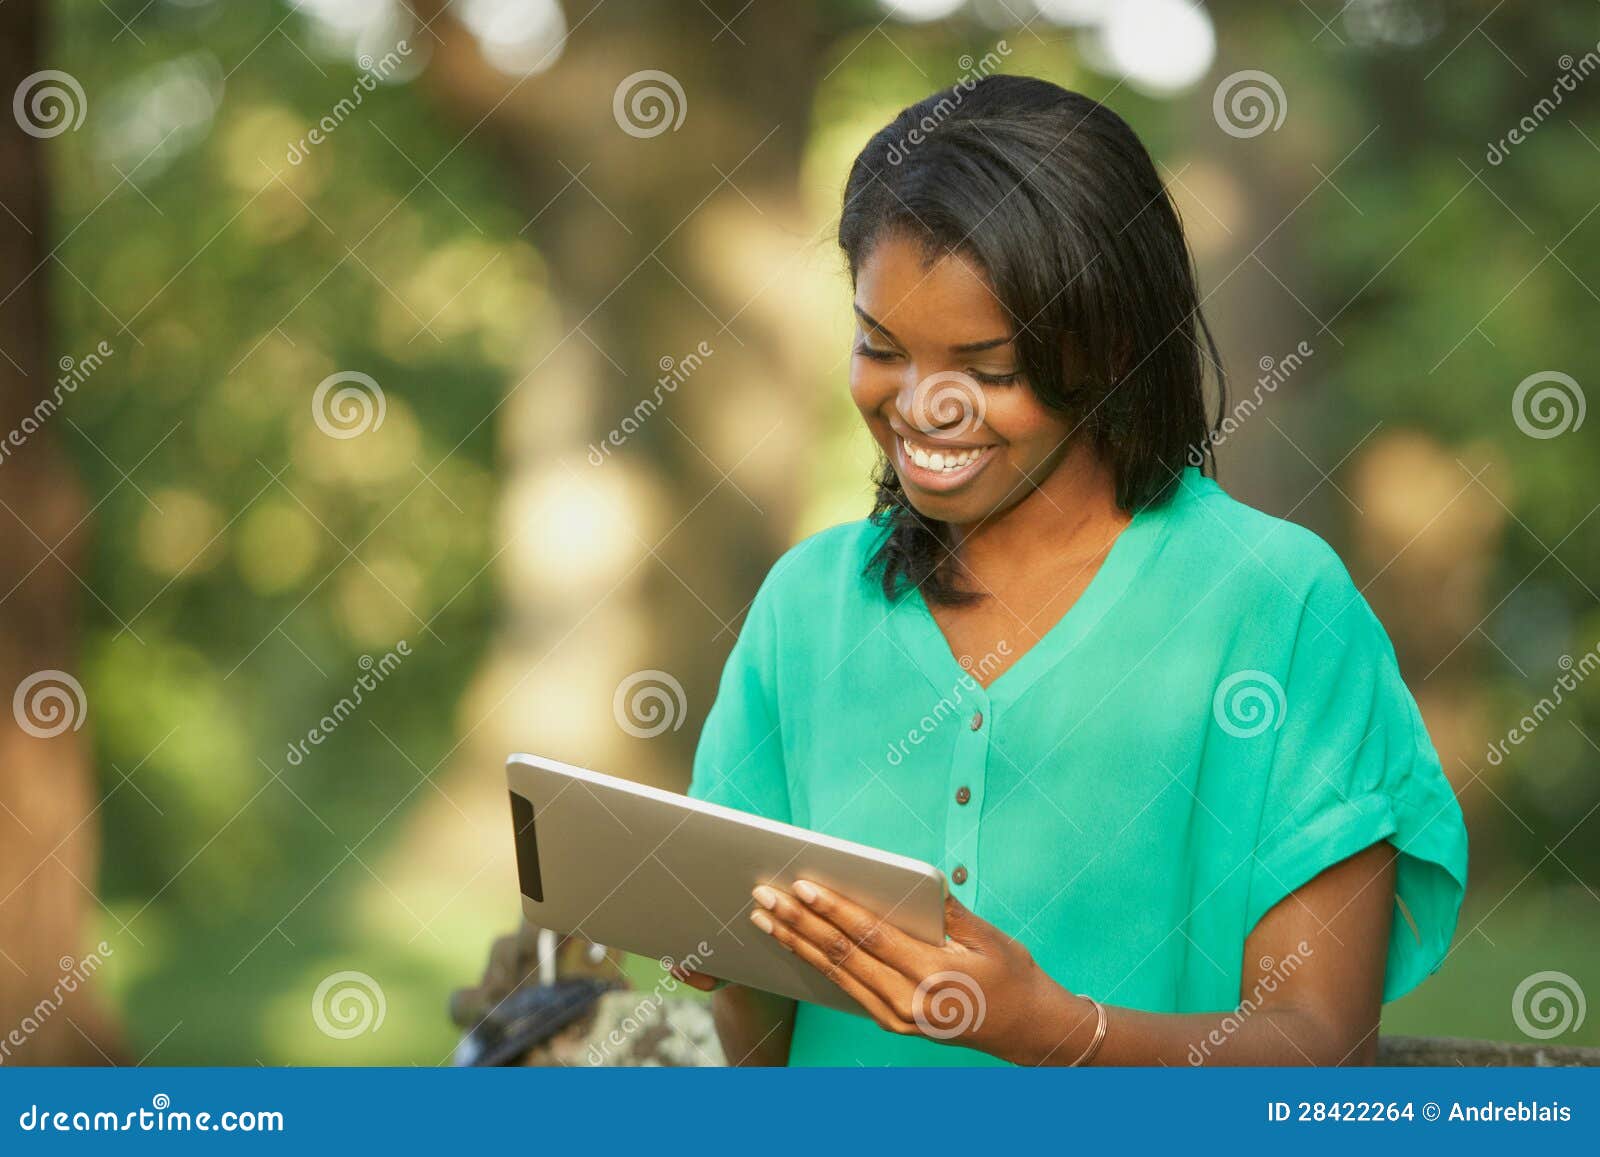 young woman using tablet computer